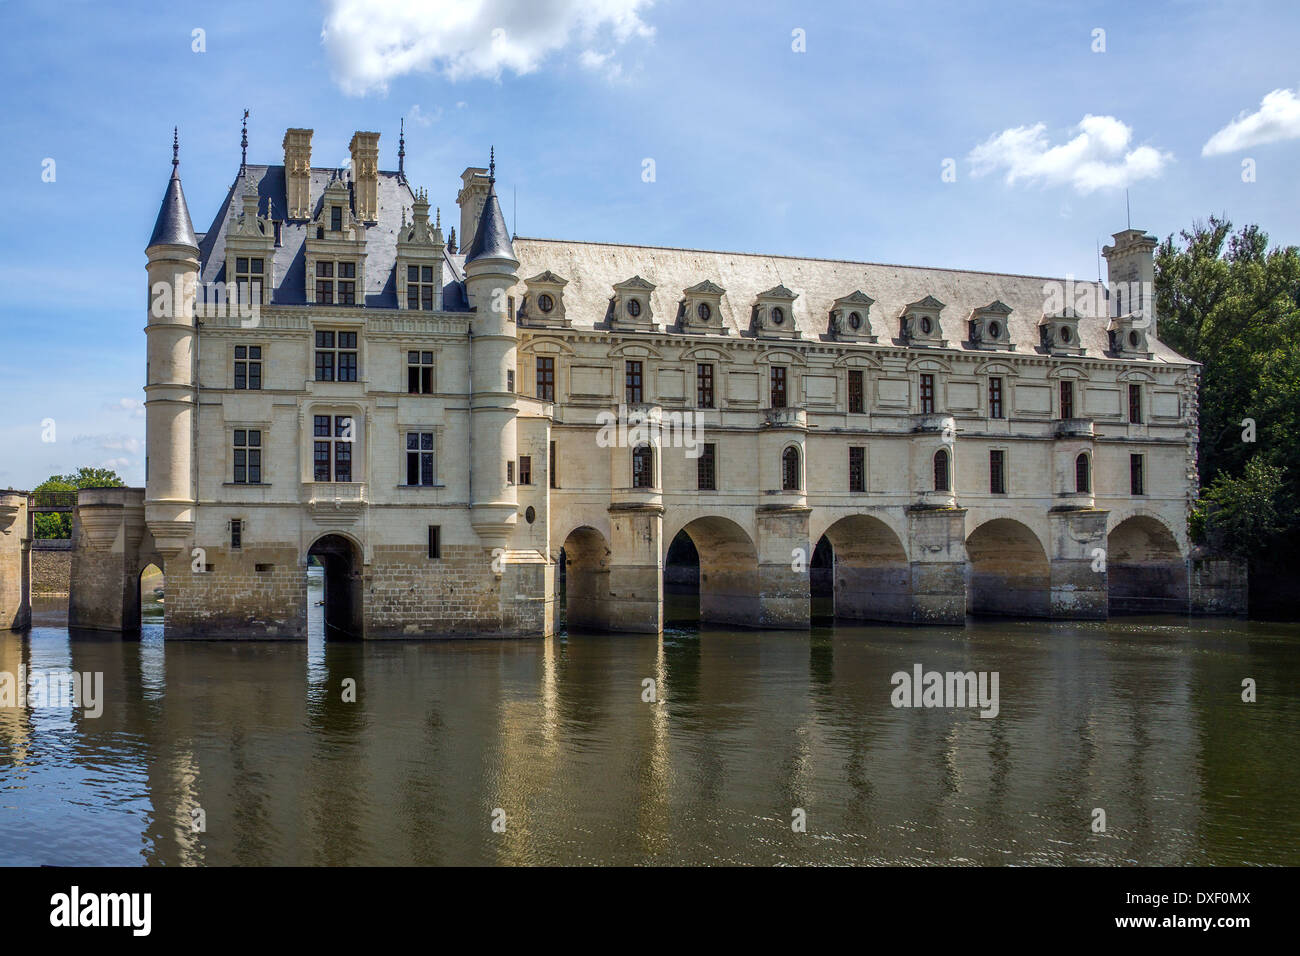 Chateau de Chenonceau spanning the River Cher in the Loire Valley in France Stock Photo